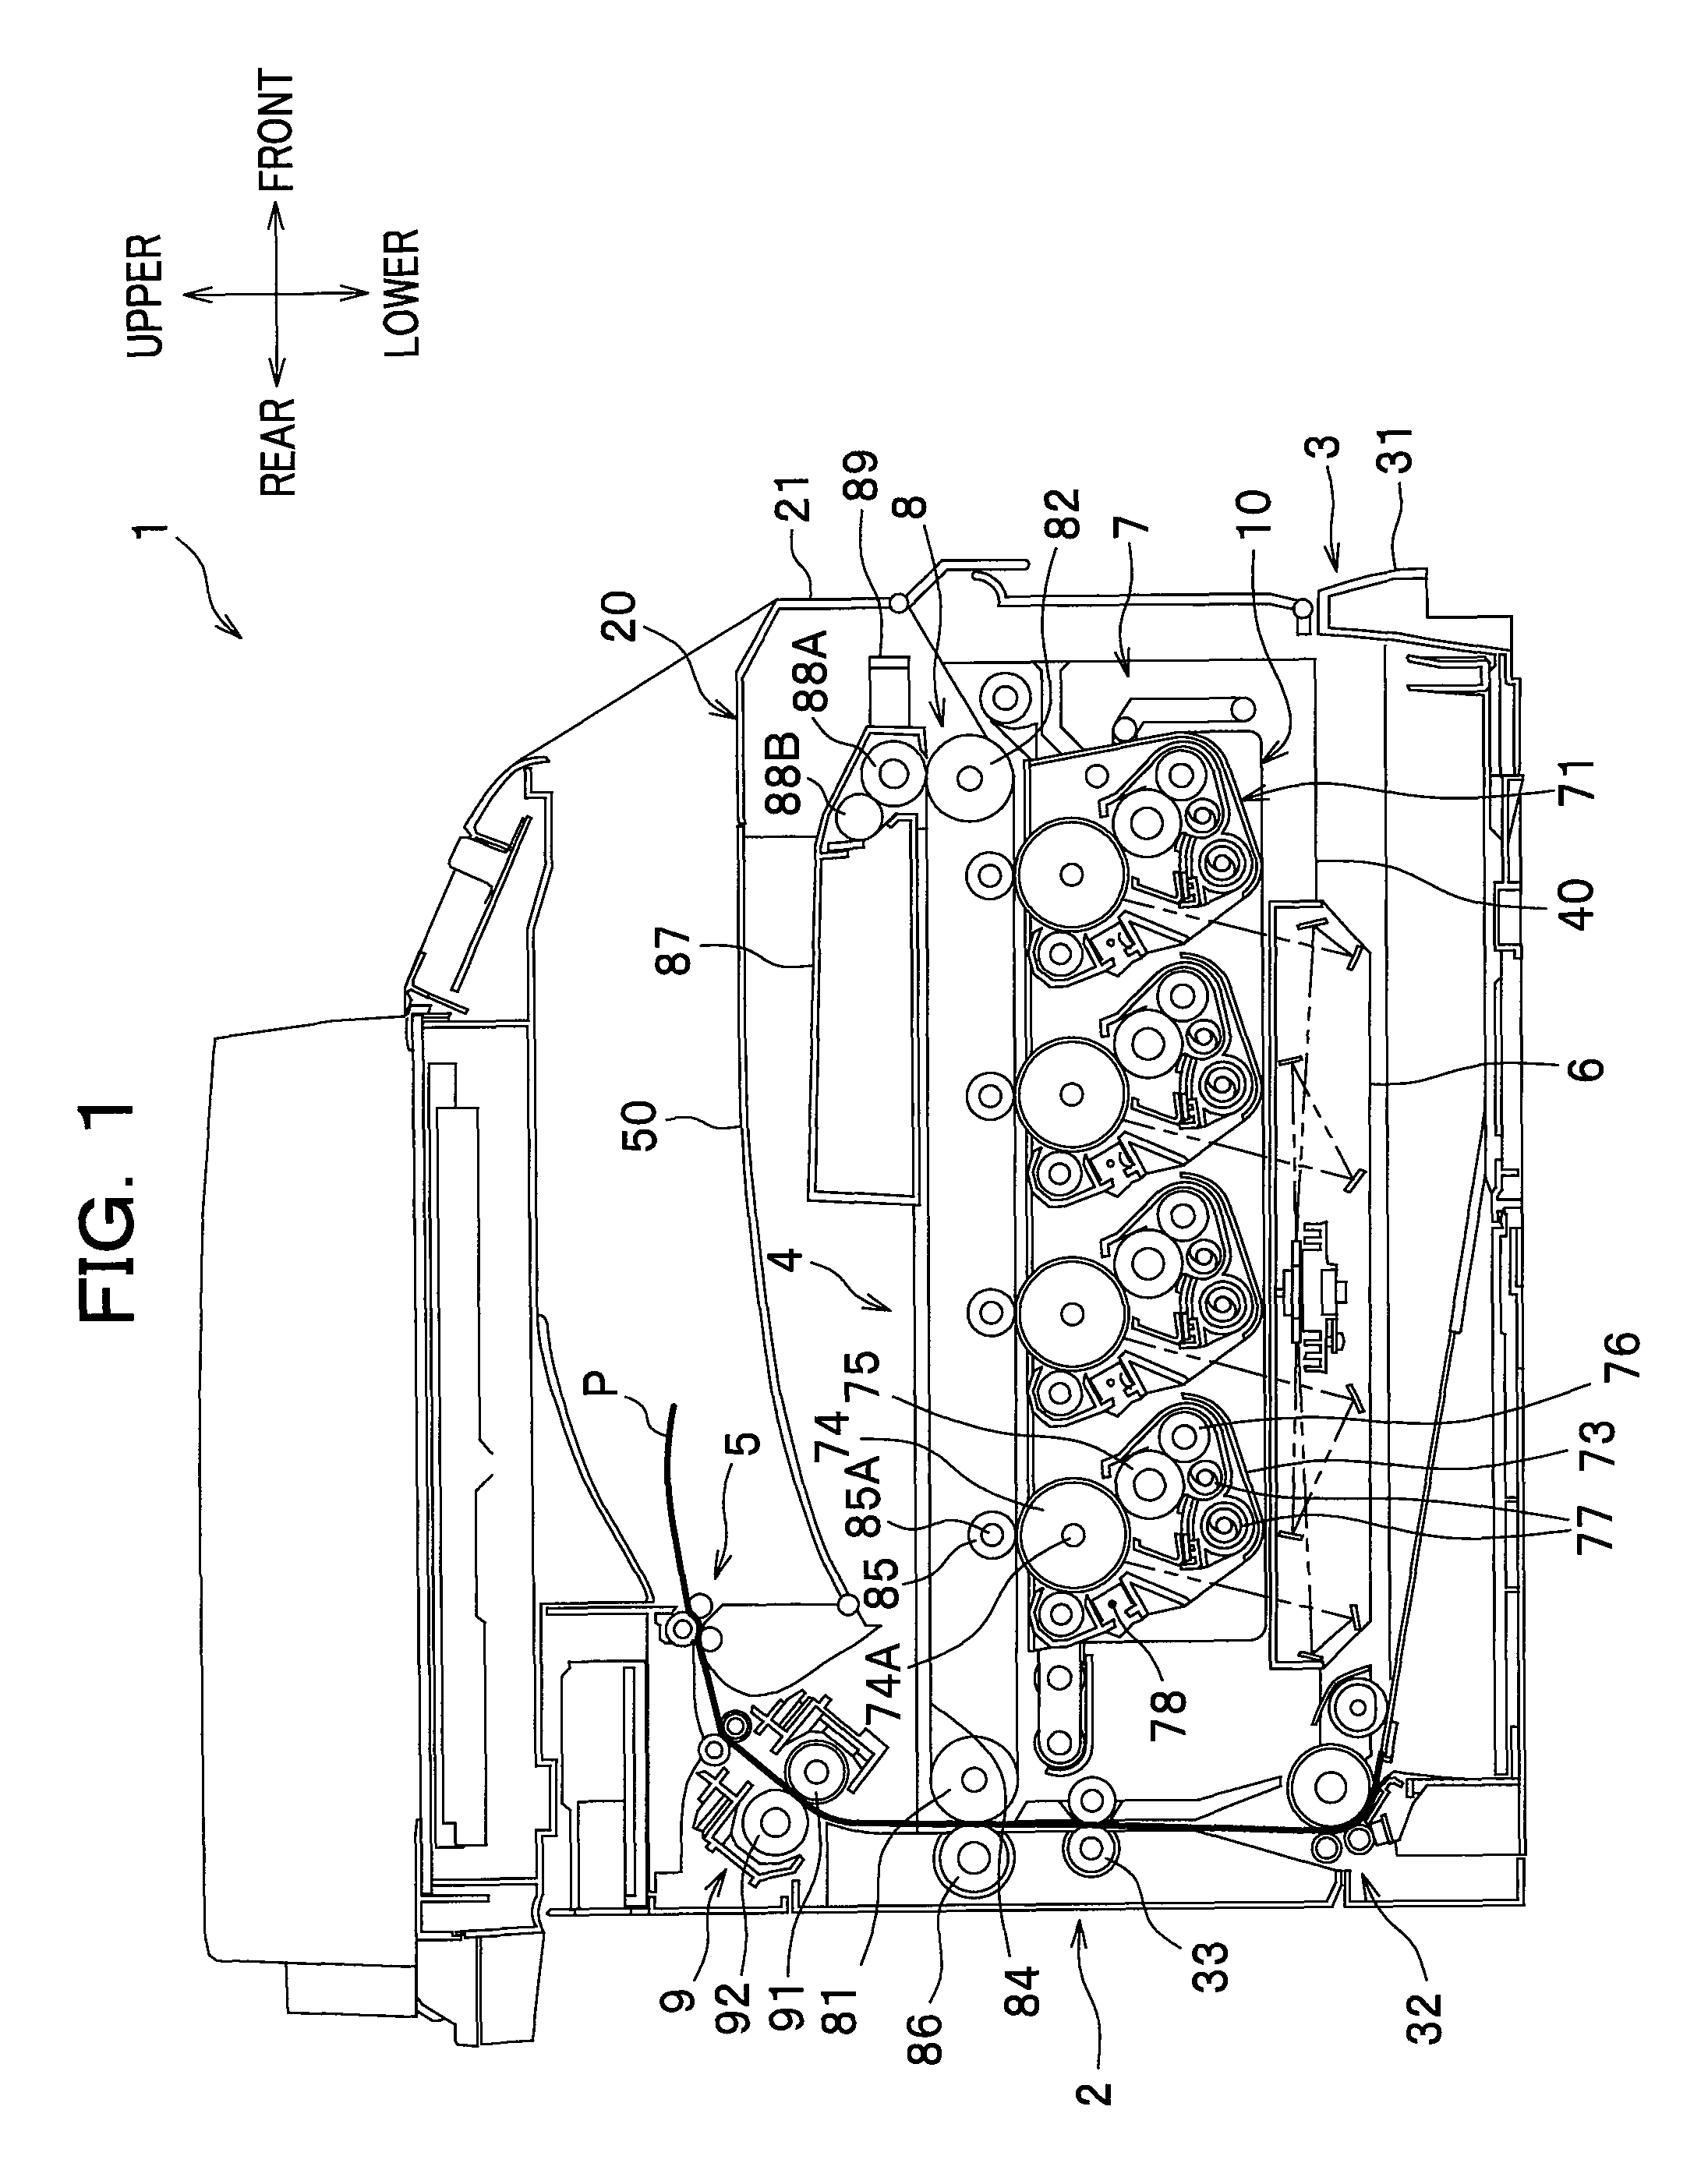 Image forming apparatus having an intermediate transfer belt disposed above a plurality of photoconductors